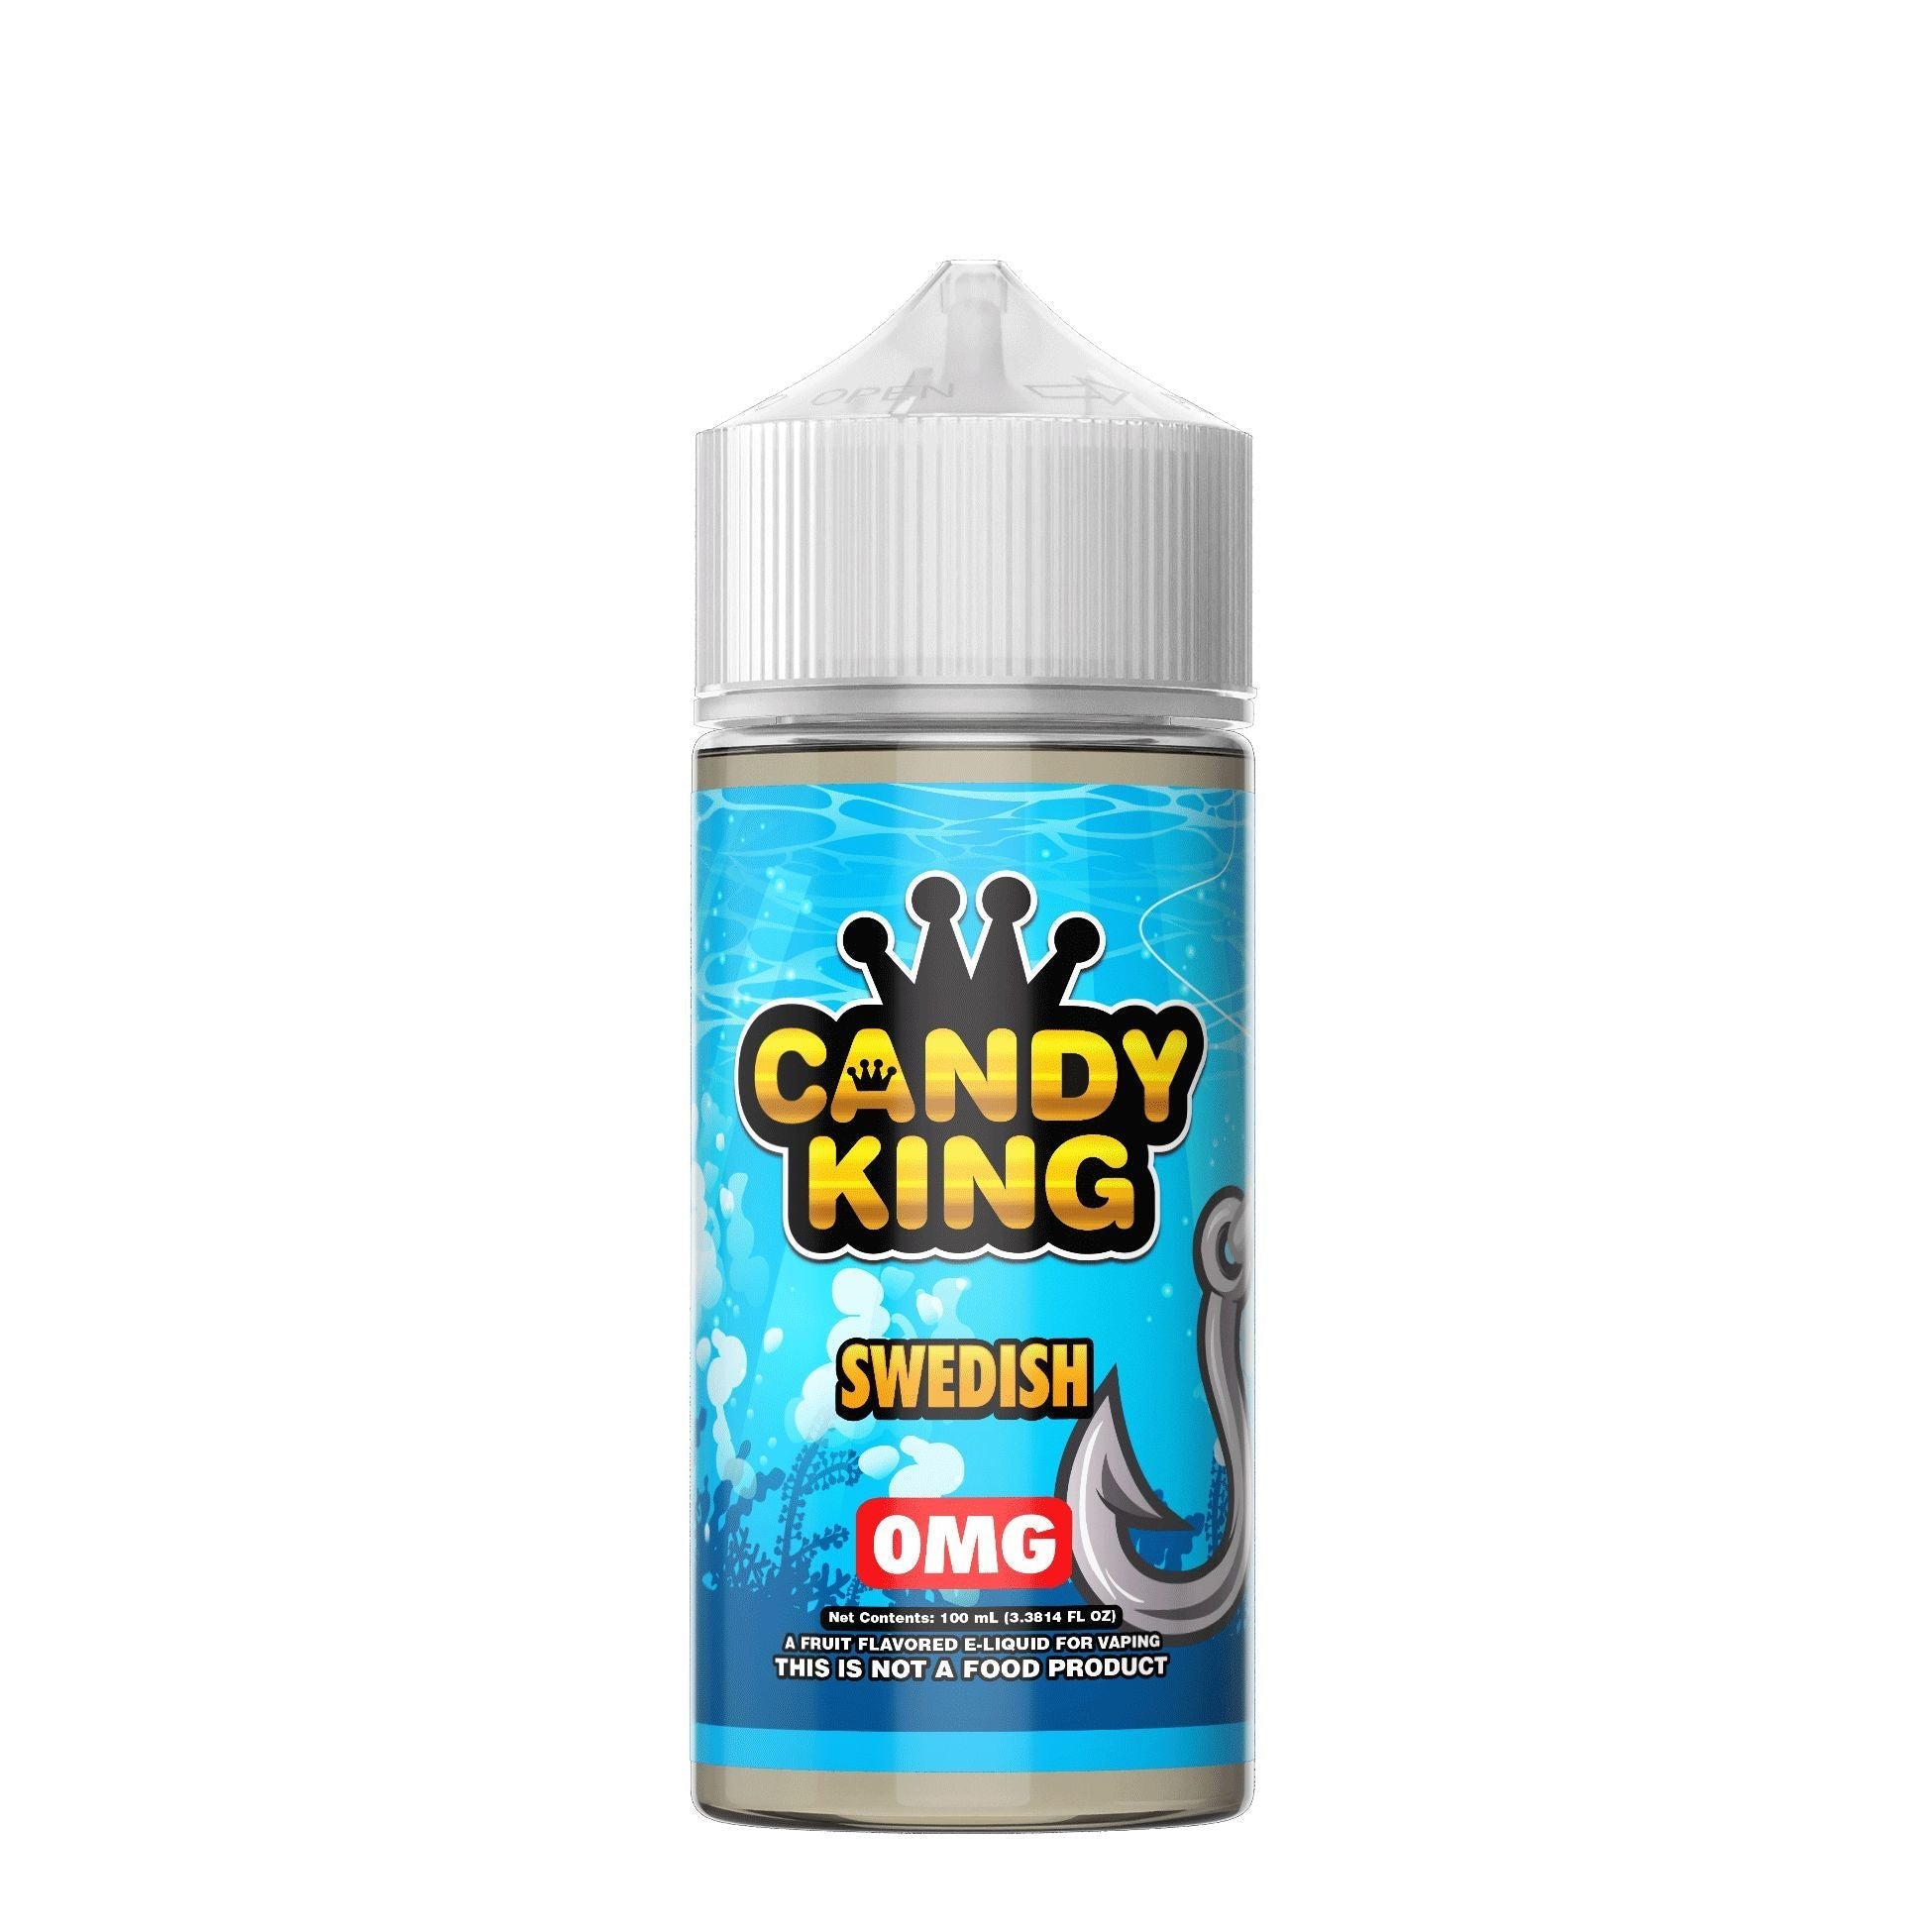 Buy Swedish By Candy King - Wick and Wire Co Melbourne Vape Shop, Victoria Australia